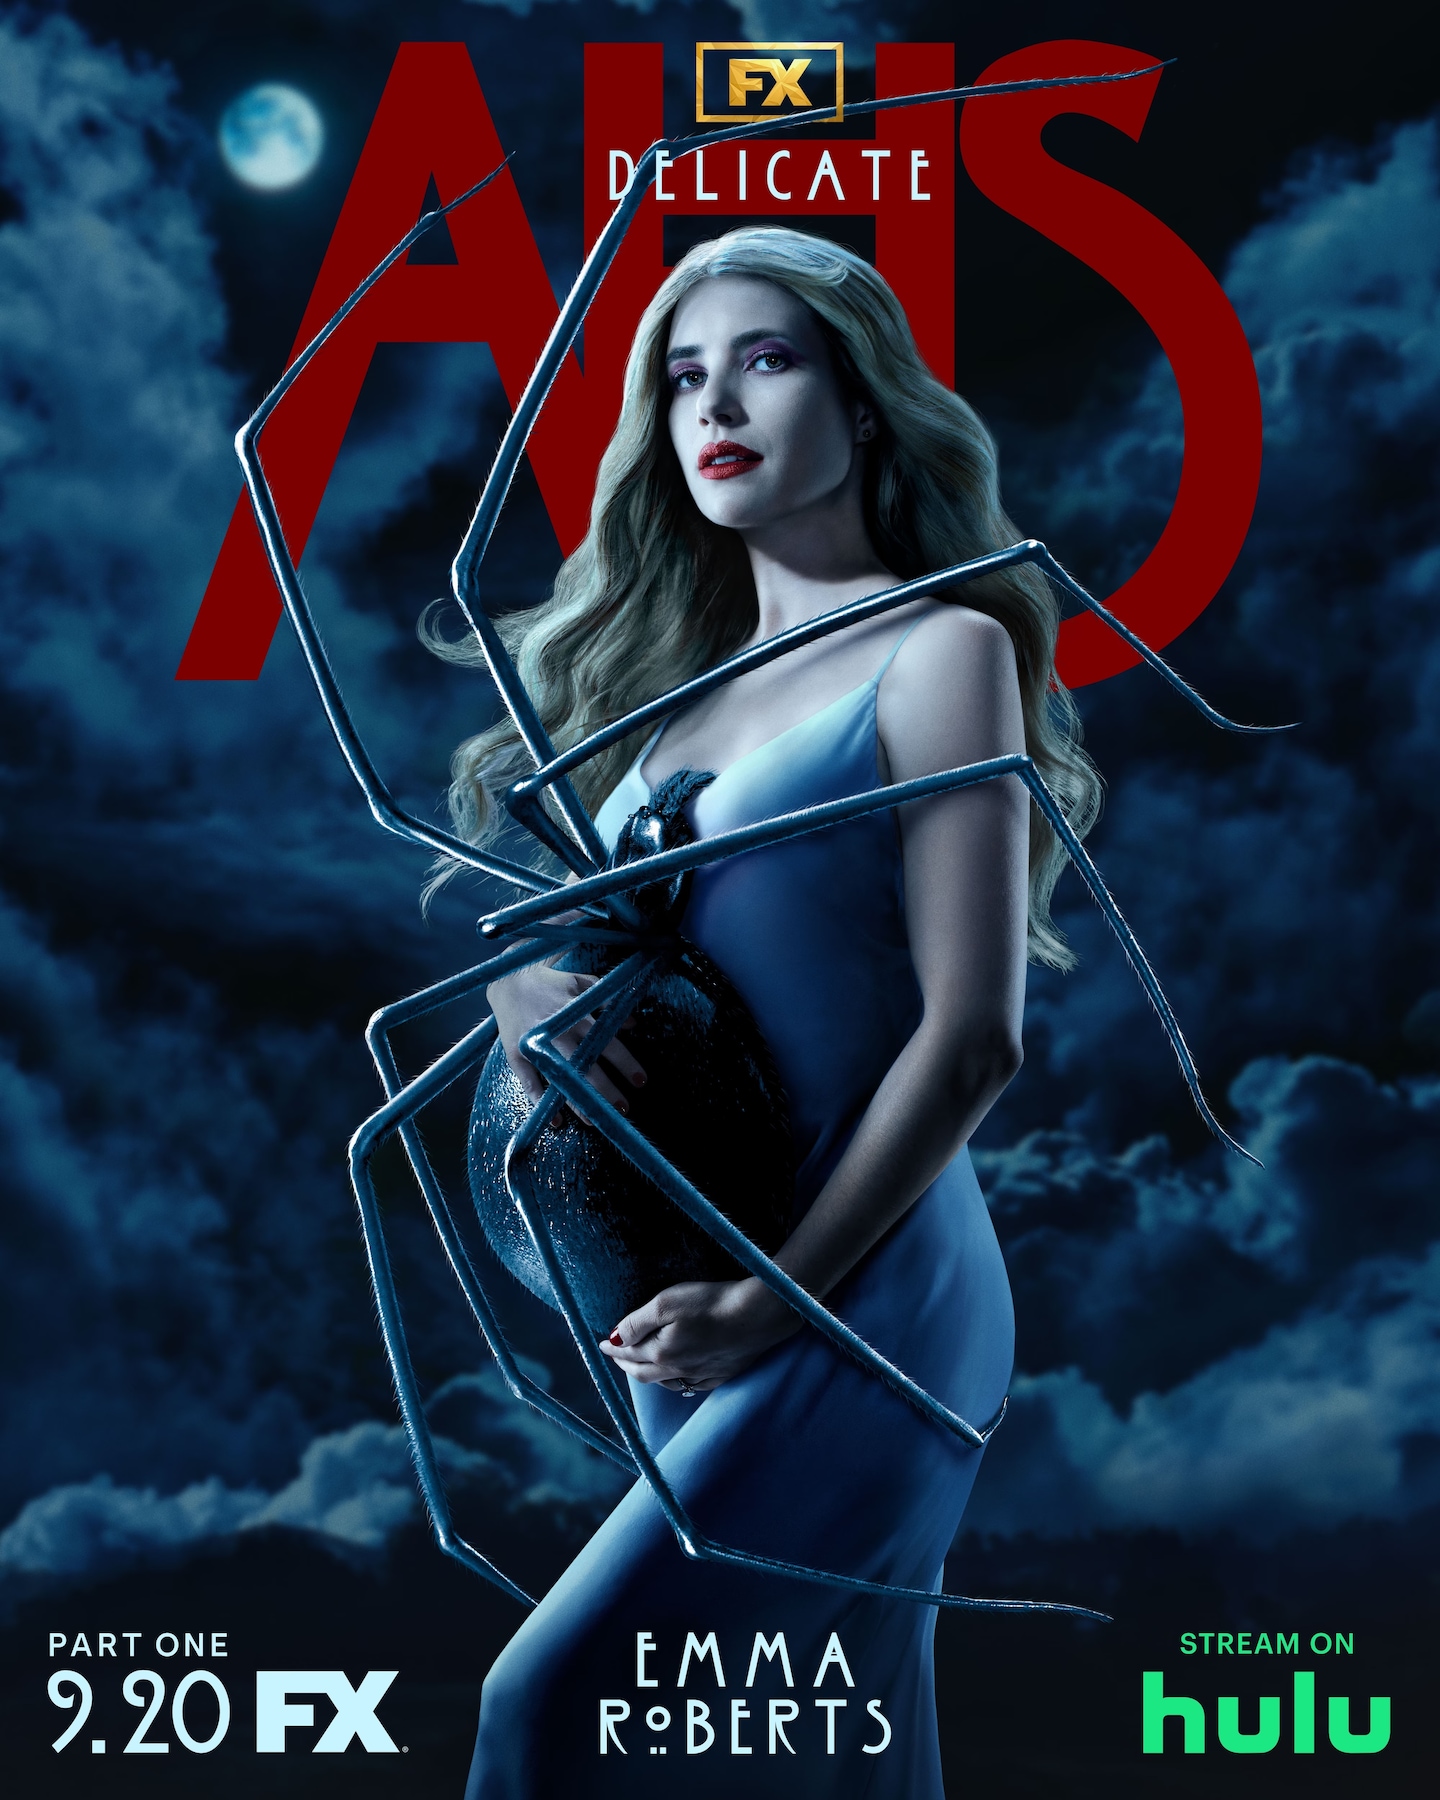 Blonde woman standing with a large spider on her stomach, in front of a dark and cloudy background for AHS: Delicate